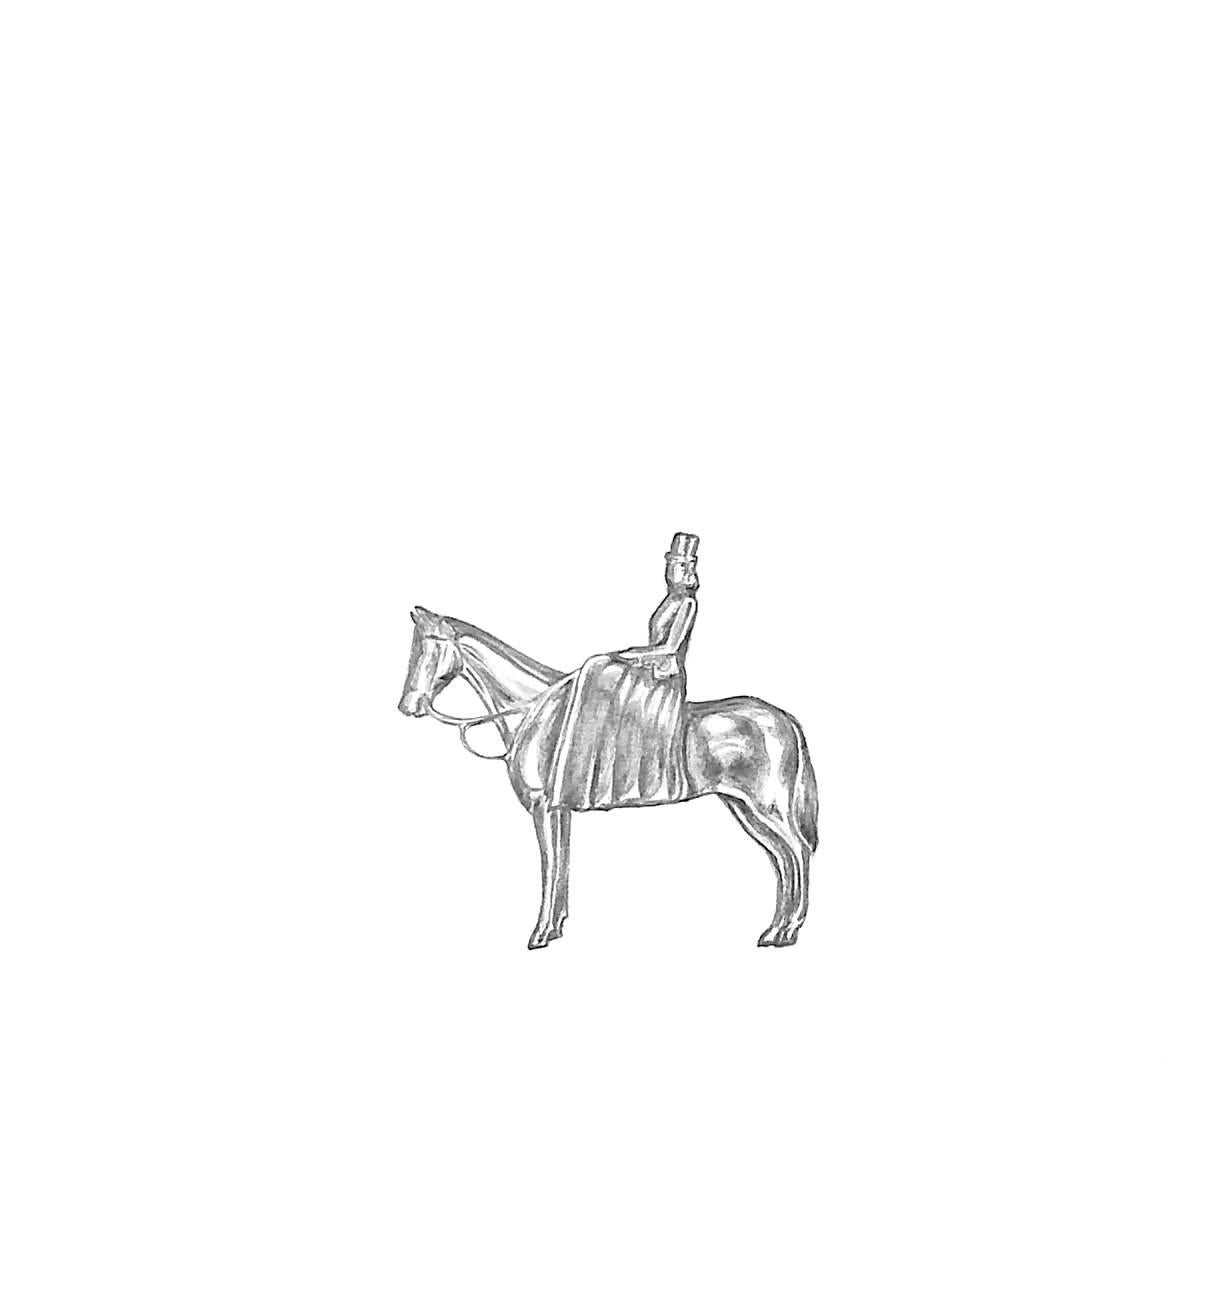 Side Saddle Pin Graphite Drawing - Art by Unknown